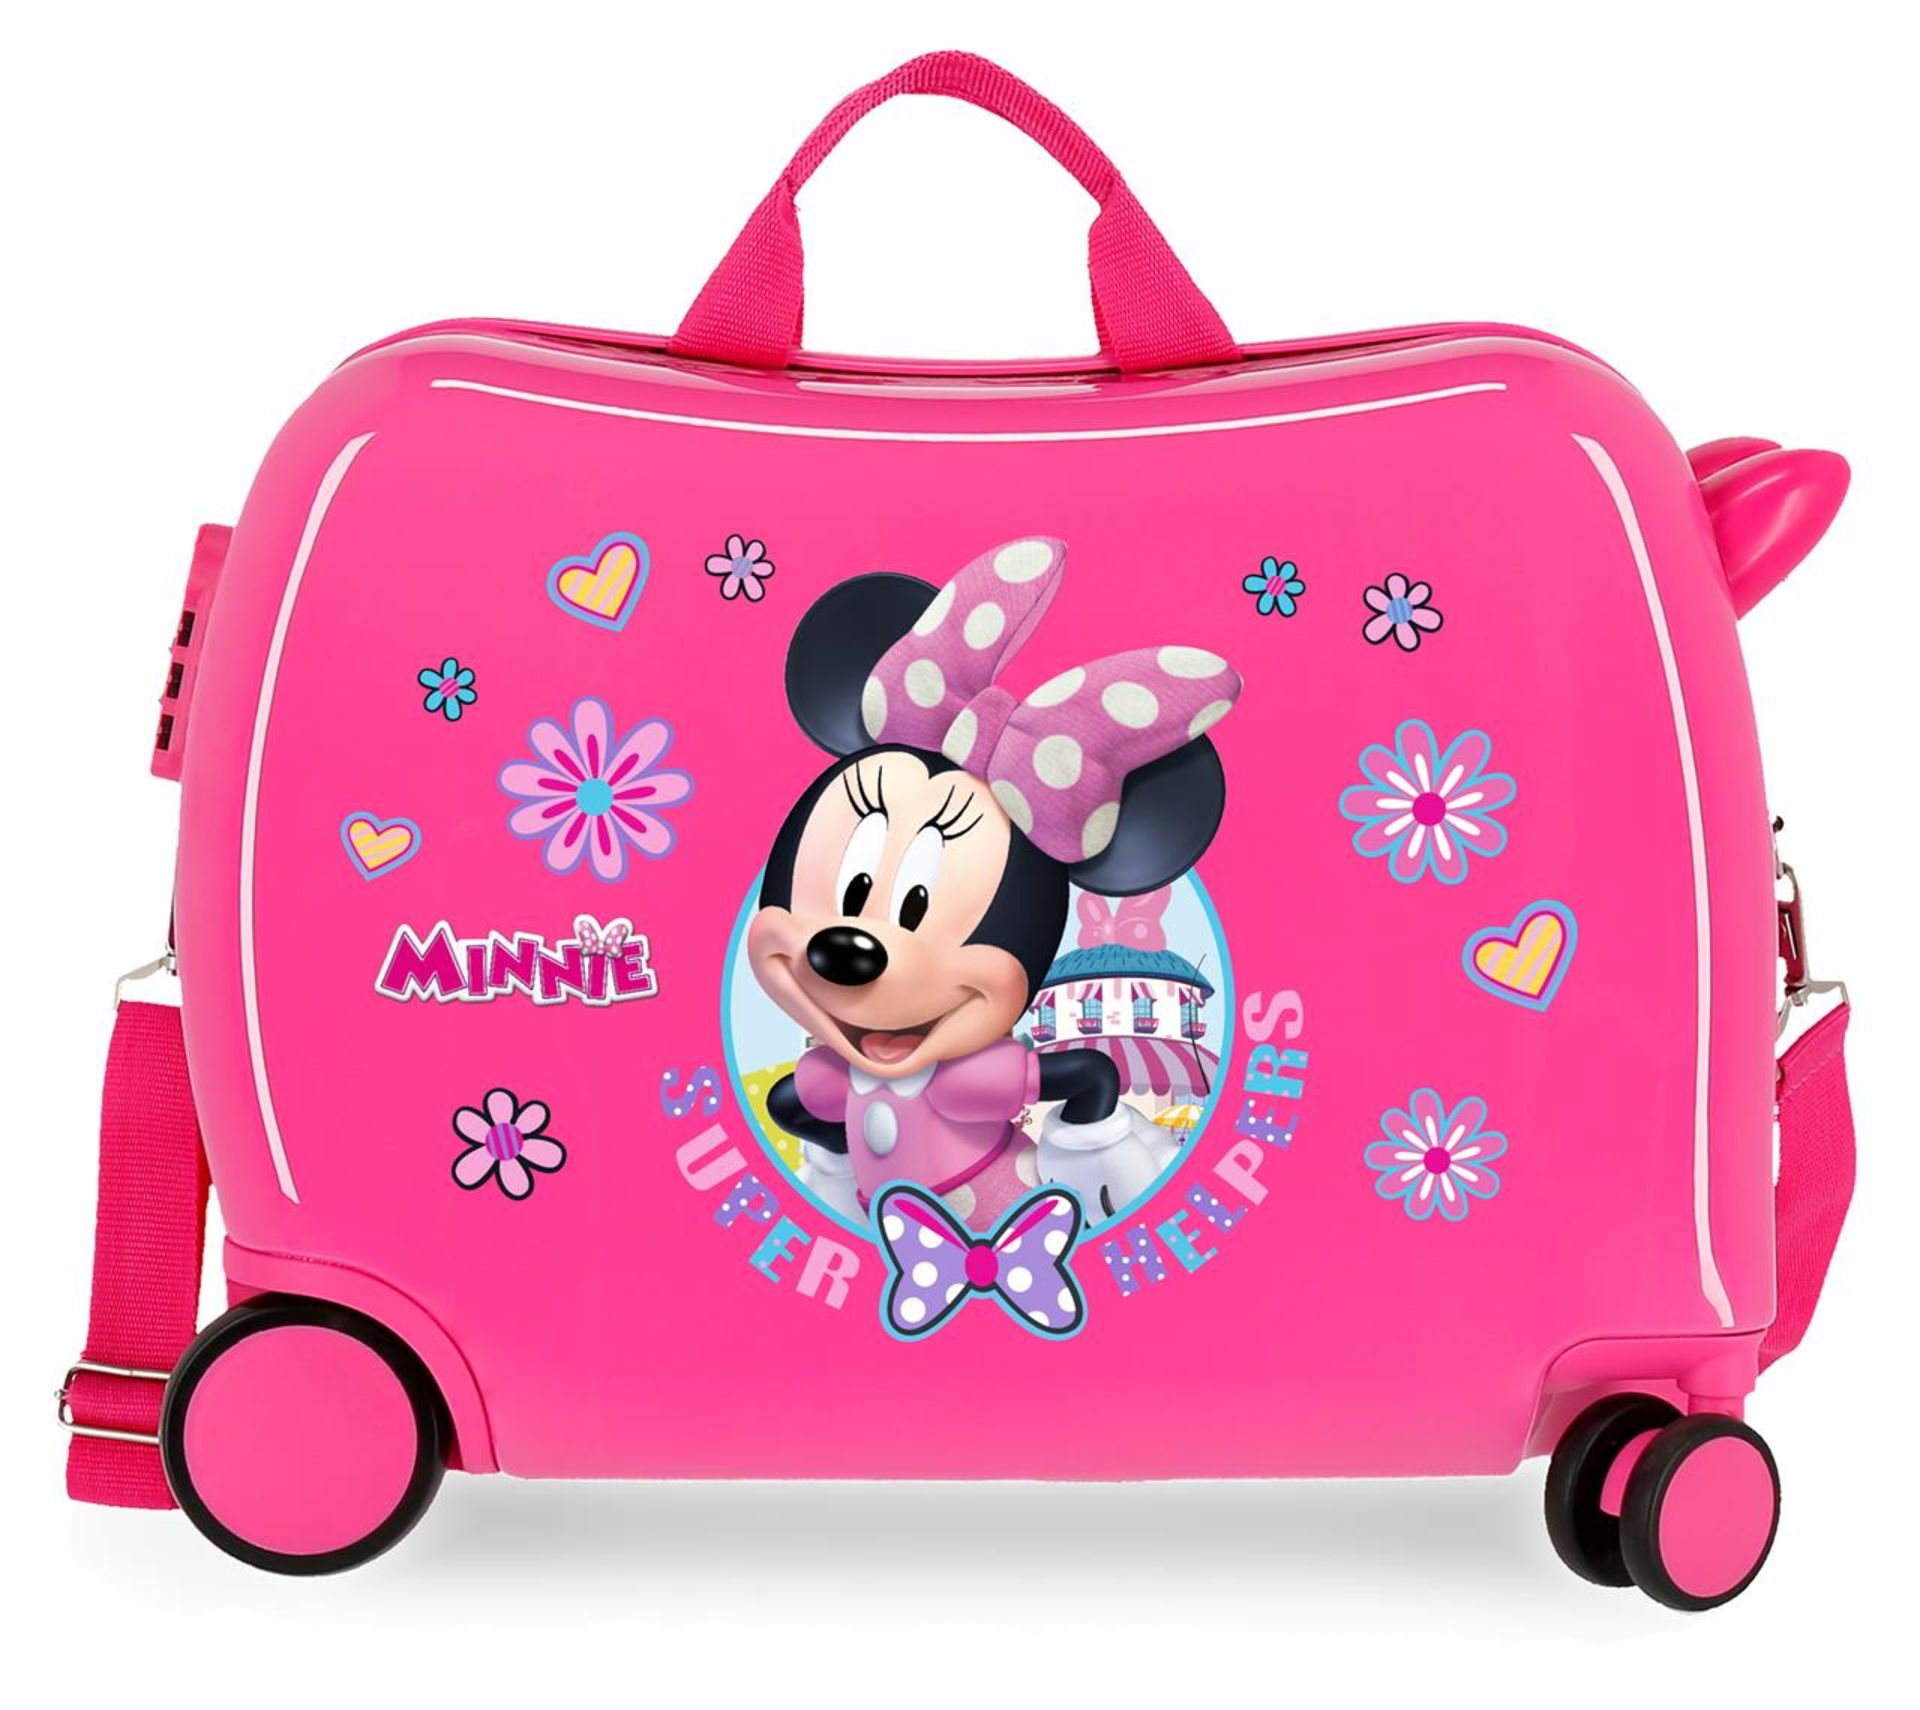 Pallet Of 48 Joumma Bags Rolling Suitcases In Various Disney Designs And Colours 50X38X20 Cm - Image 74 of 102